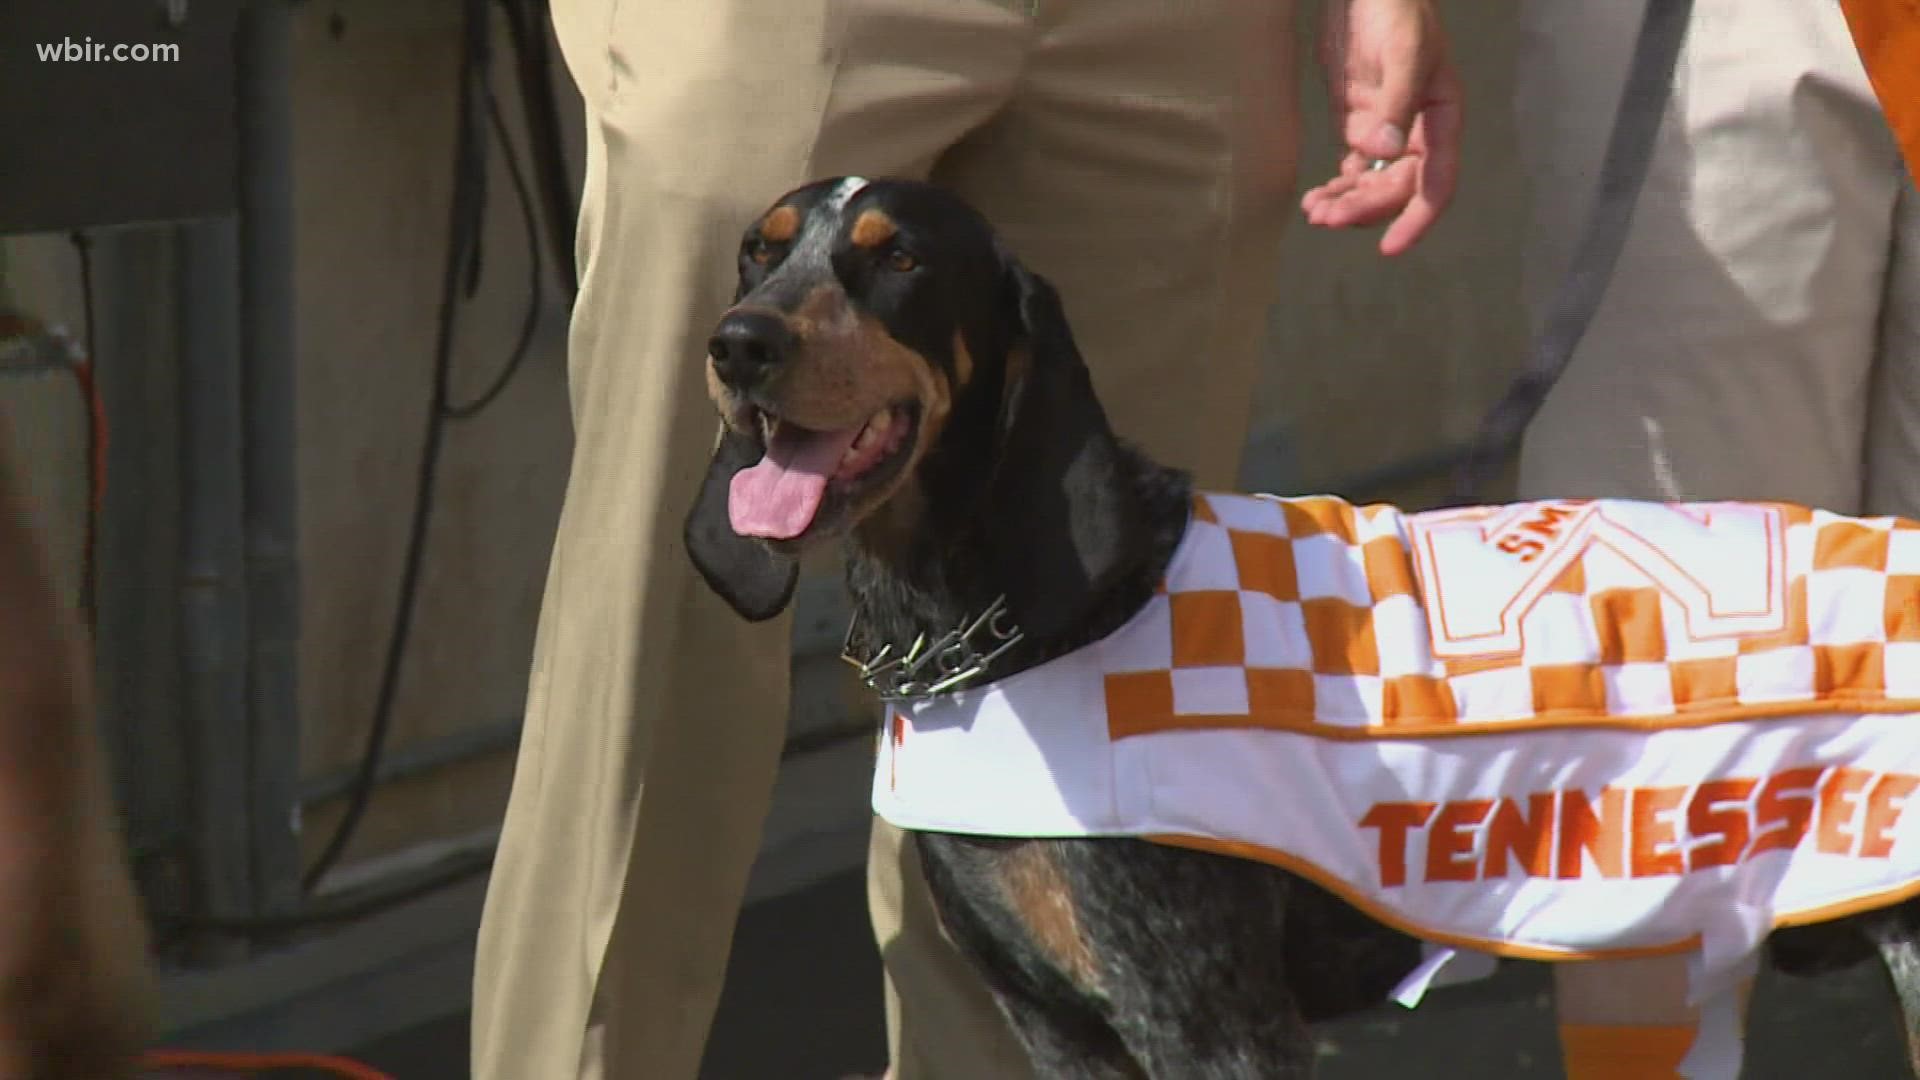 Smokey the Bluetick Coonhound was chosen as UT's mascot during a contest in 1953.